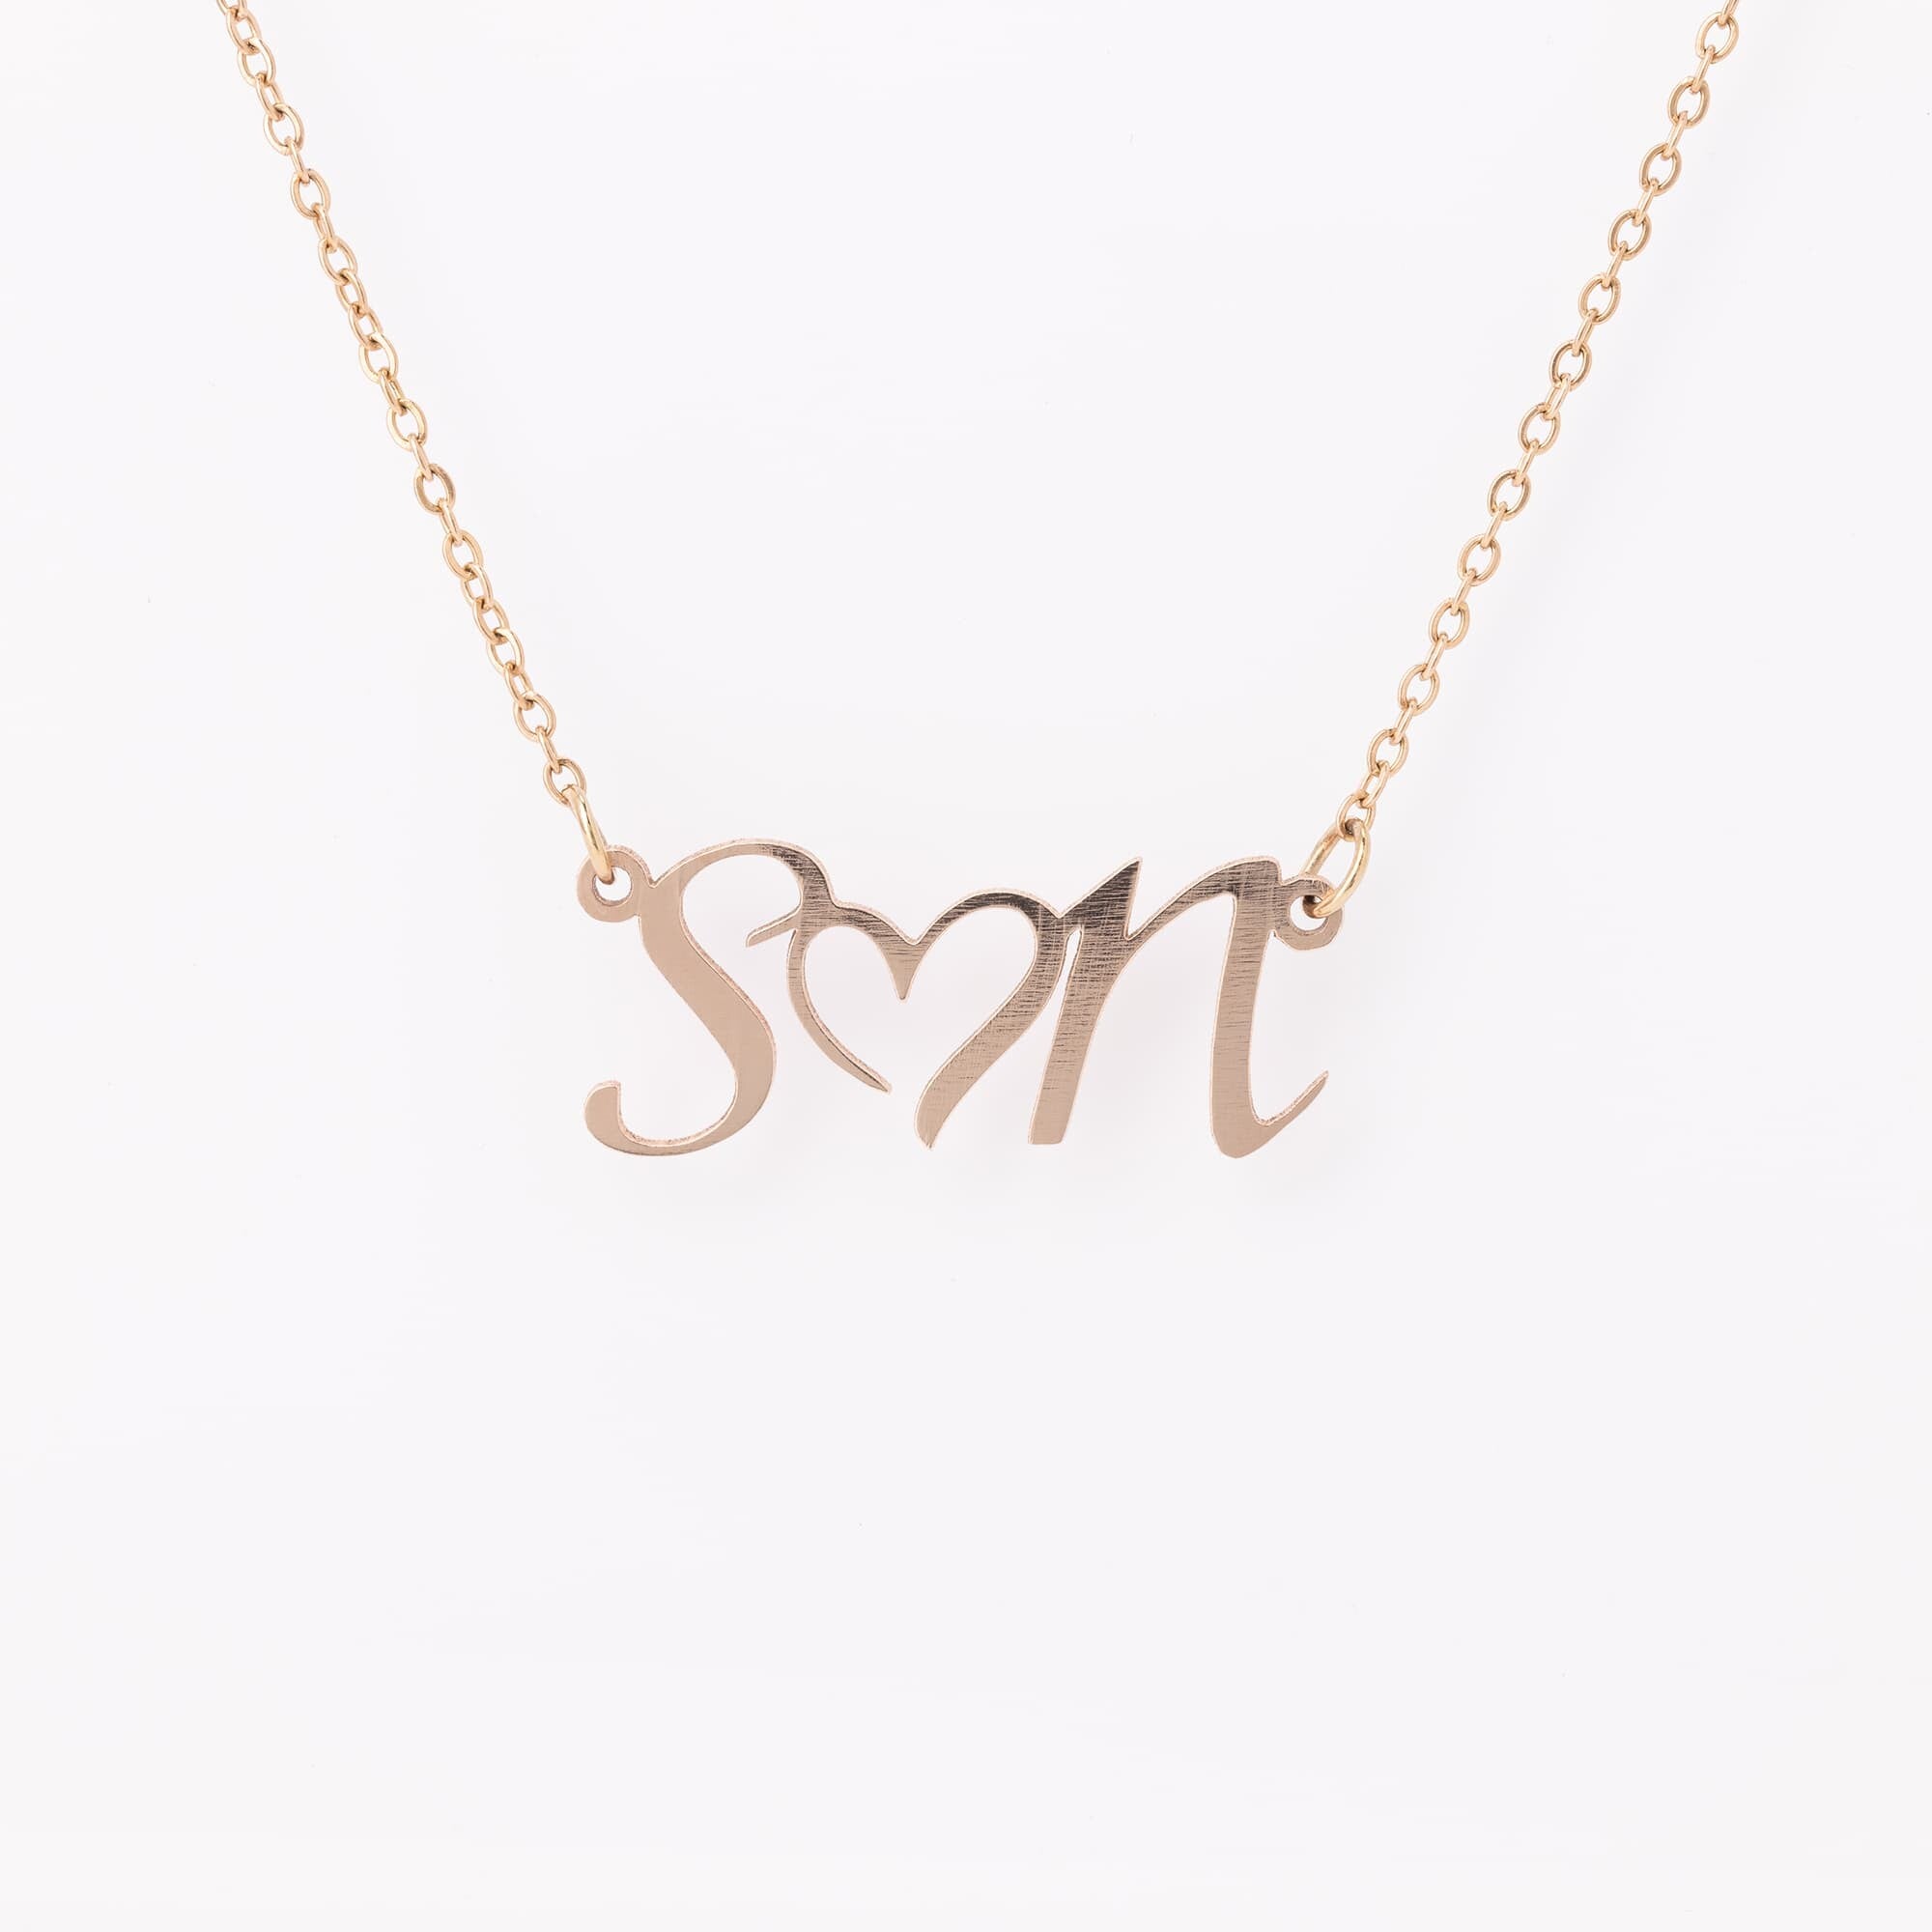 Personalized Double Initial Heart Necklace for Favorite Woman in Your Life